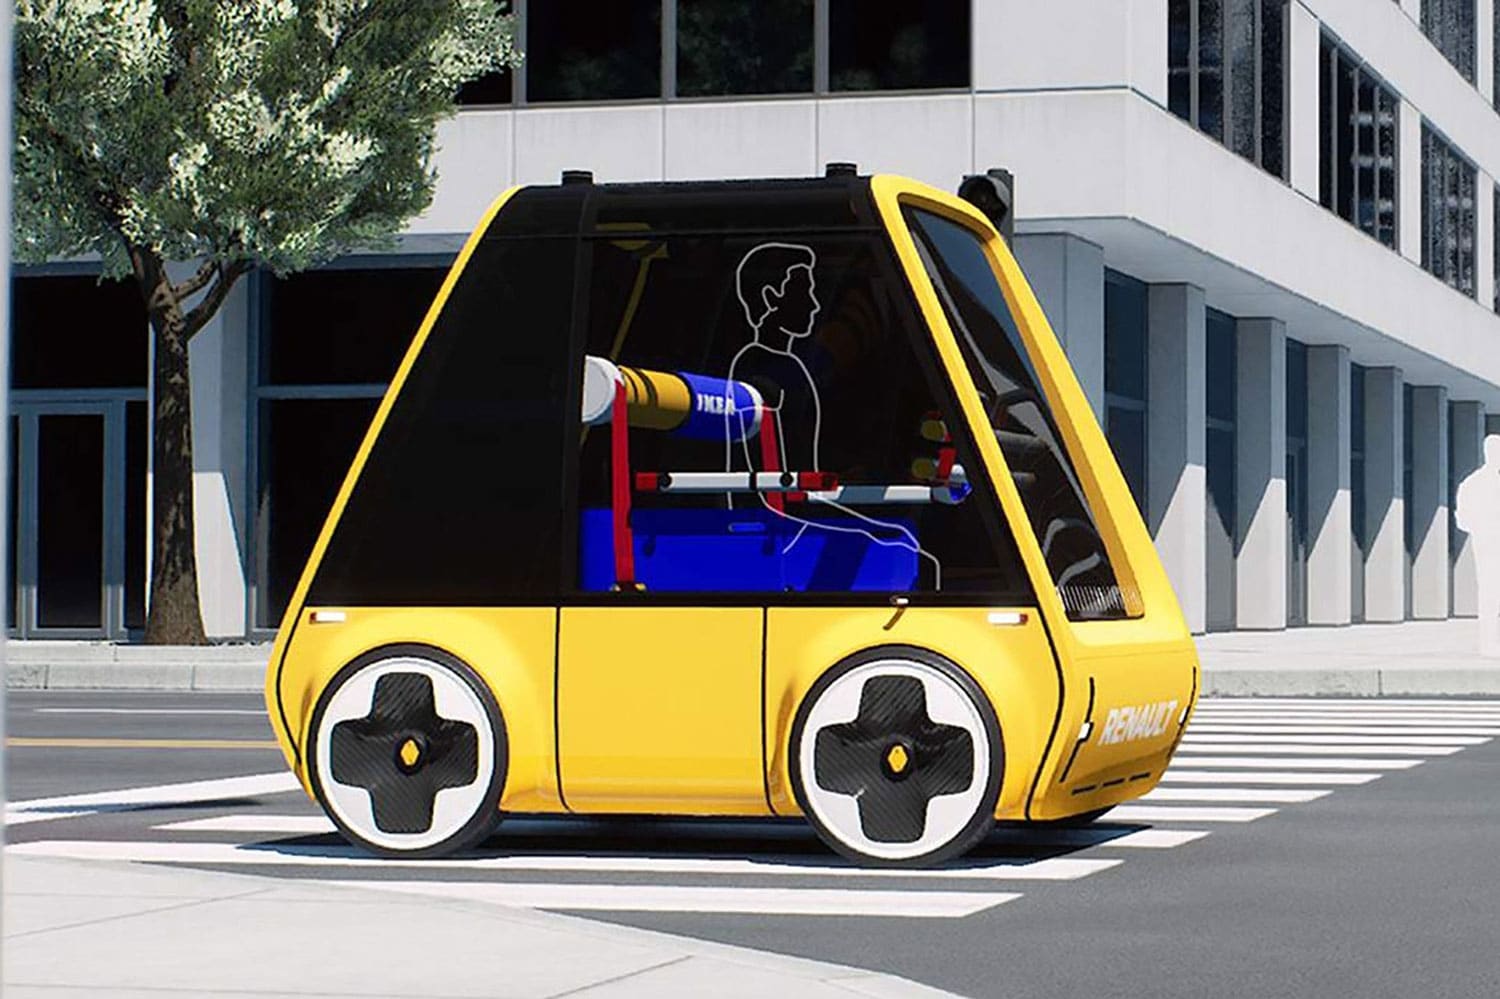 Meet Höga, an electric car that you could assemble by yourself, at home.